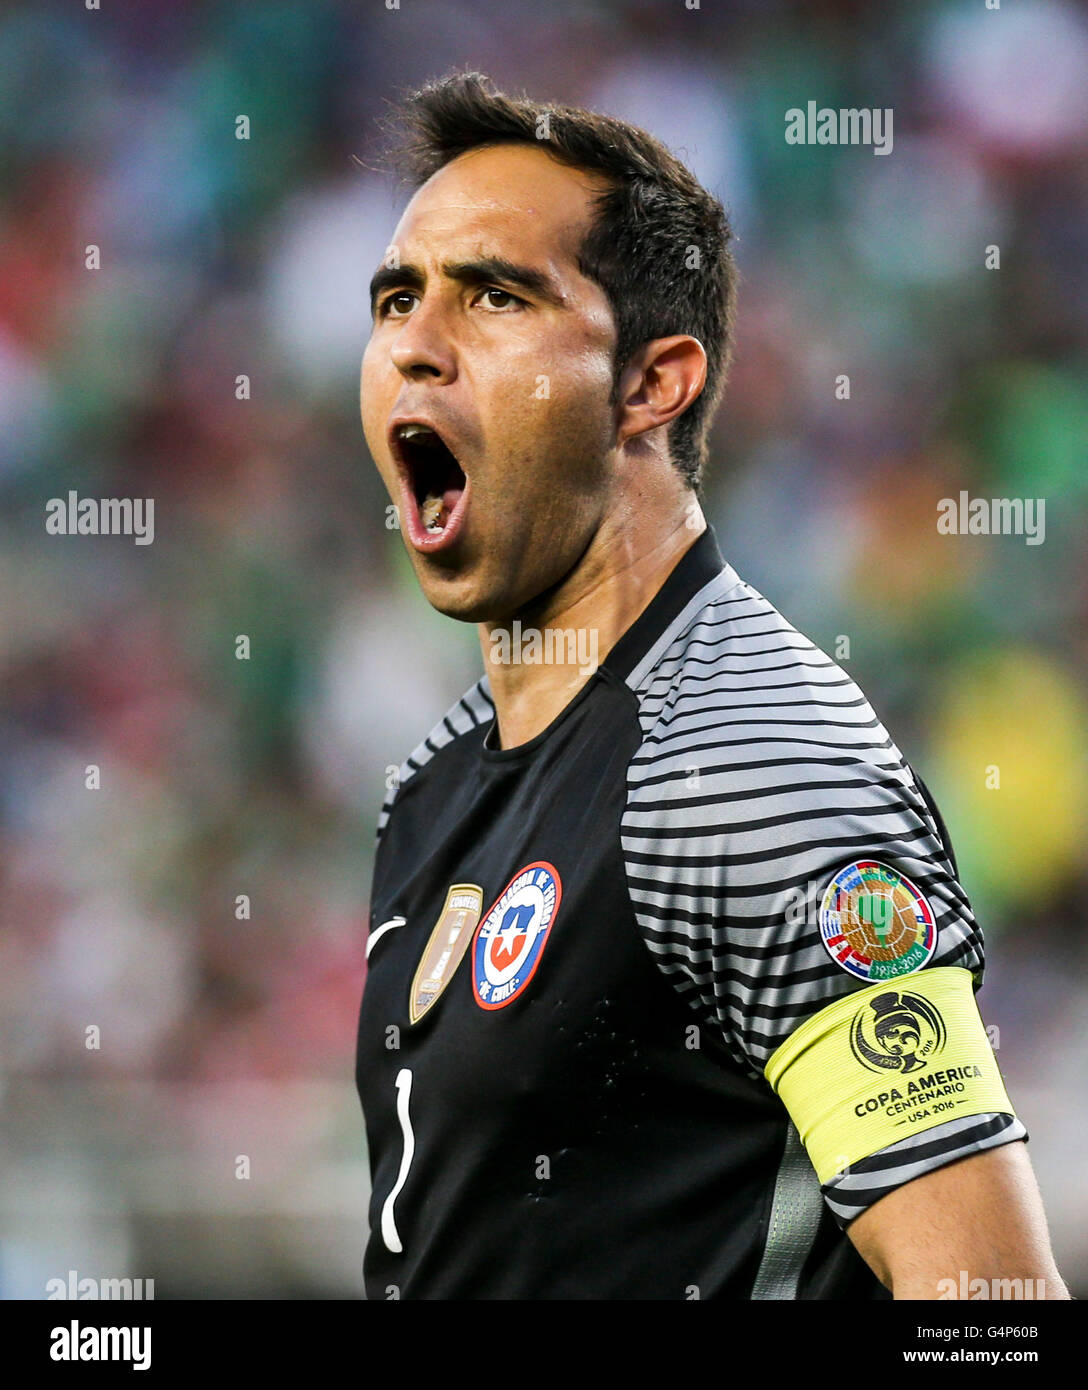 Santa Clara, USA. 18th June, 2016. Claudio Bravo, goalie of Chile, celebrates during the quarterfinal match against Mexico of 2016 Copa America soccer tournament at the Levi's Stadium in Santa Clara, California, the United States, June 18, 2016. Chile won 7-0. Credit:  Zhao Hanrong/Xinhua/Alamy Live News Stock Photo